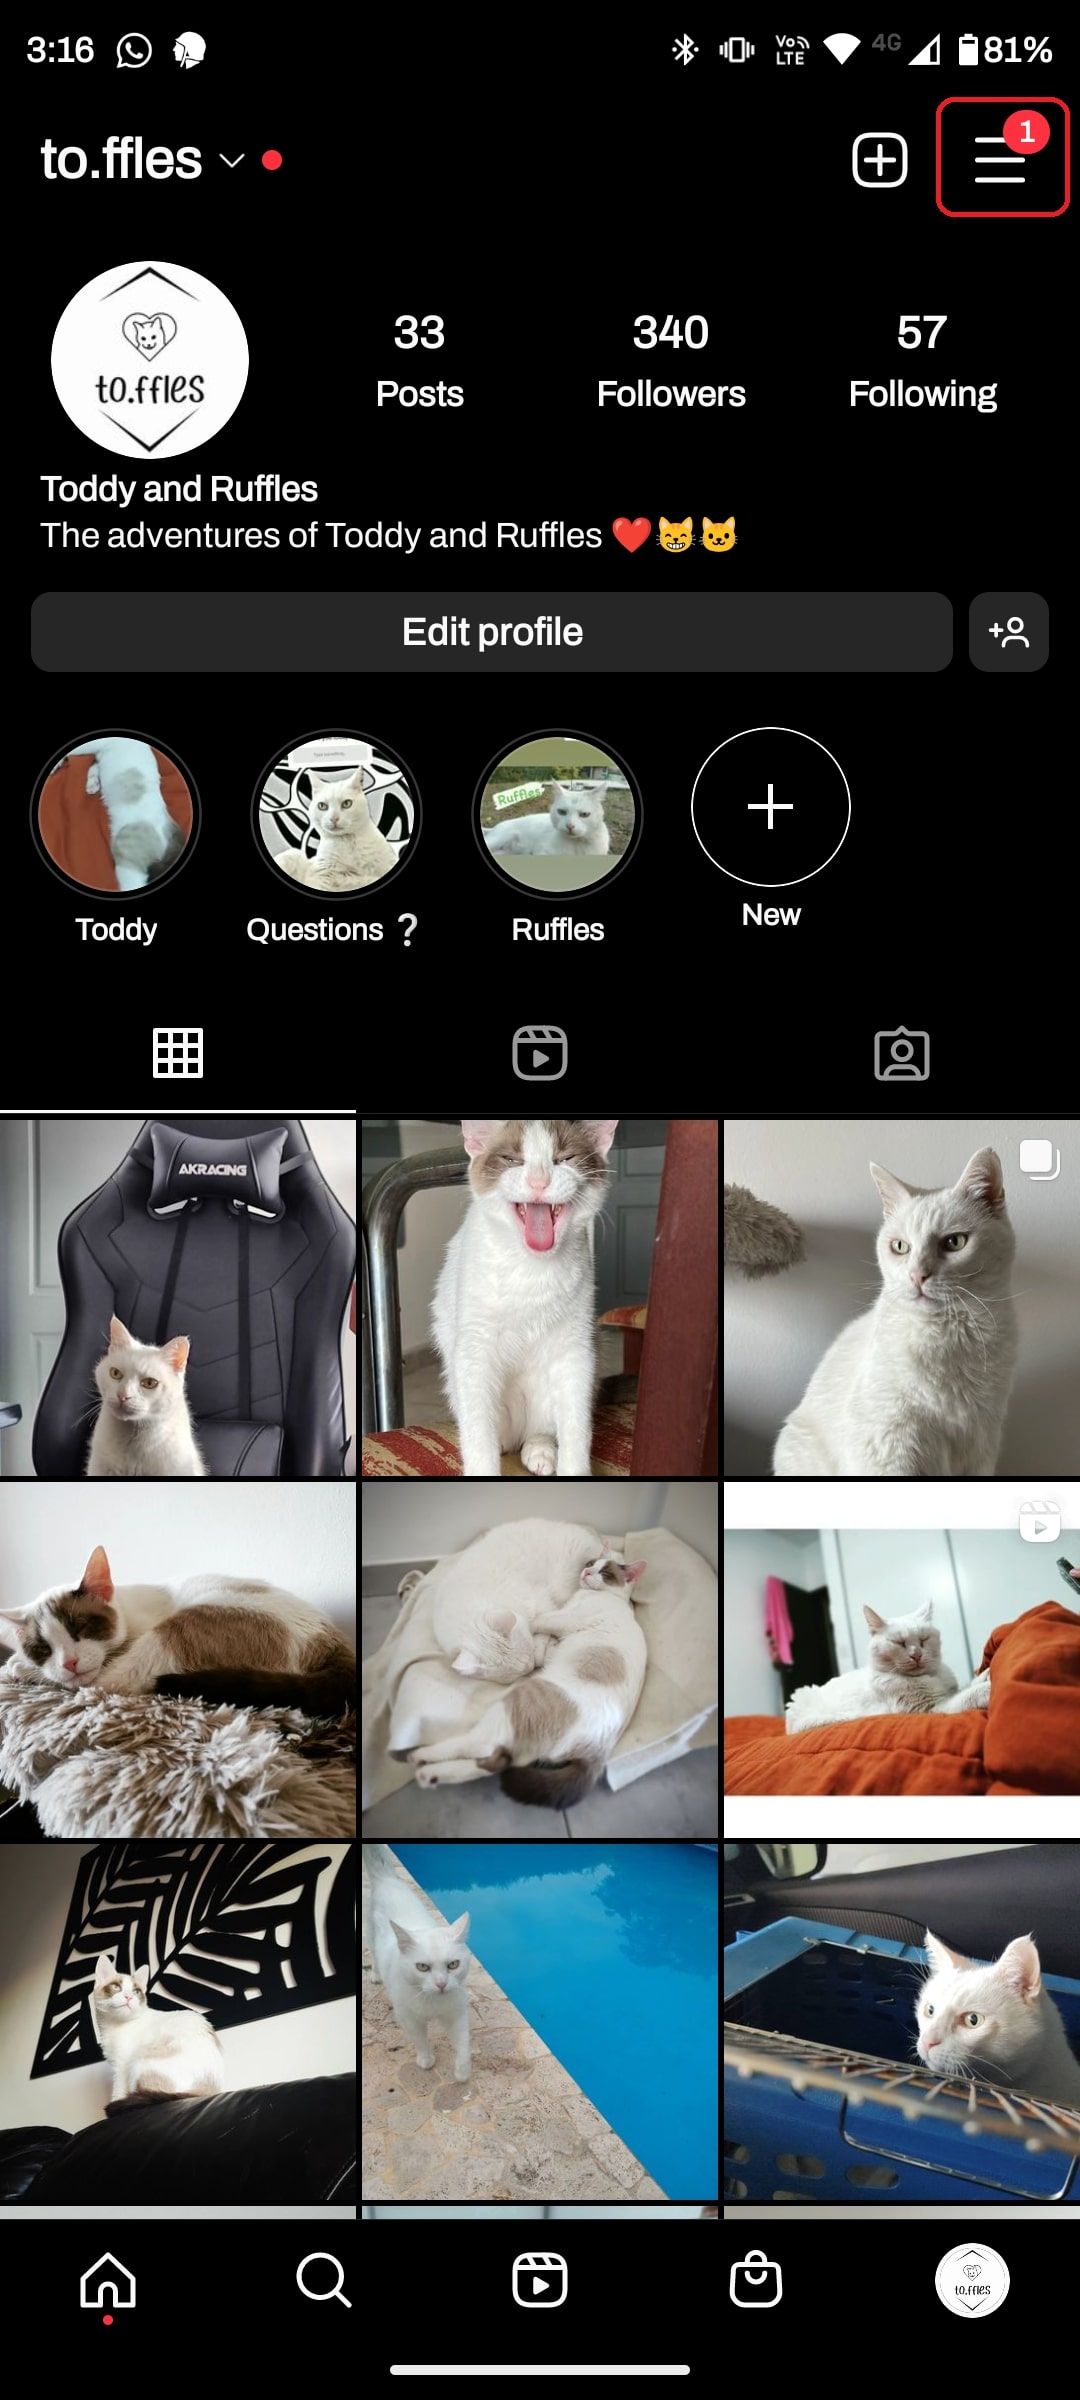 Instagram page with images of cats